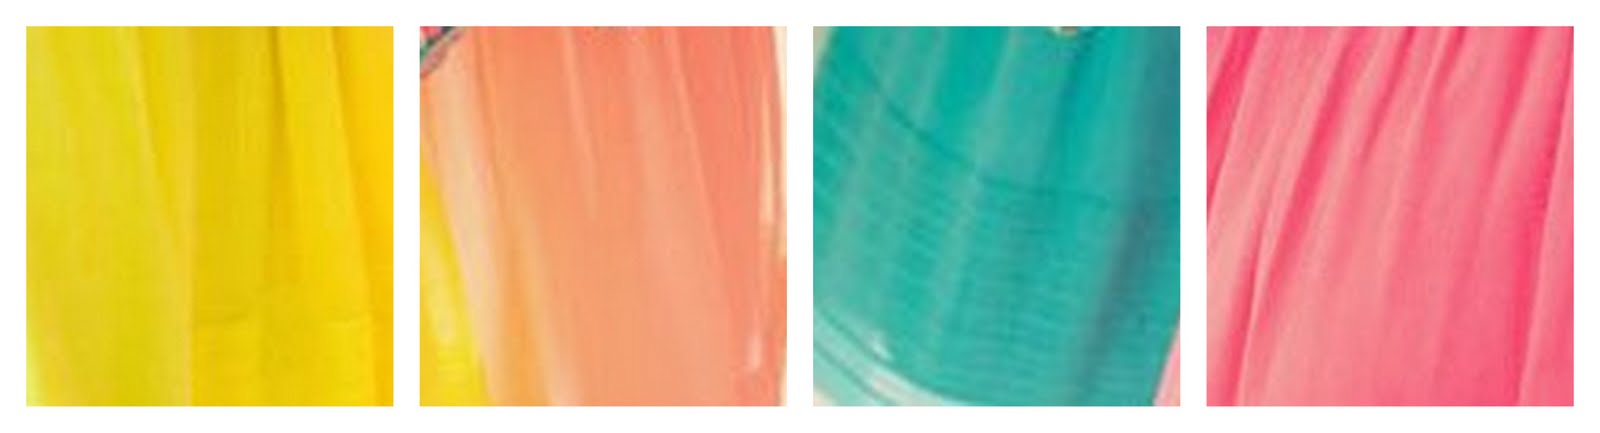 Colour Inspiration Spring Pastels Yellow Coral Teal Pink